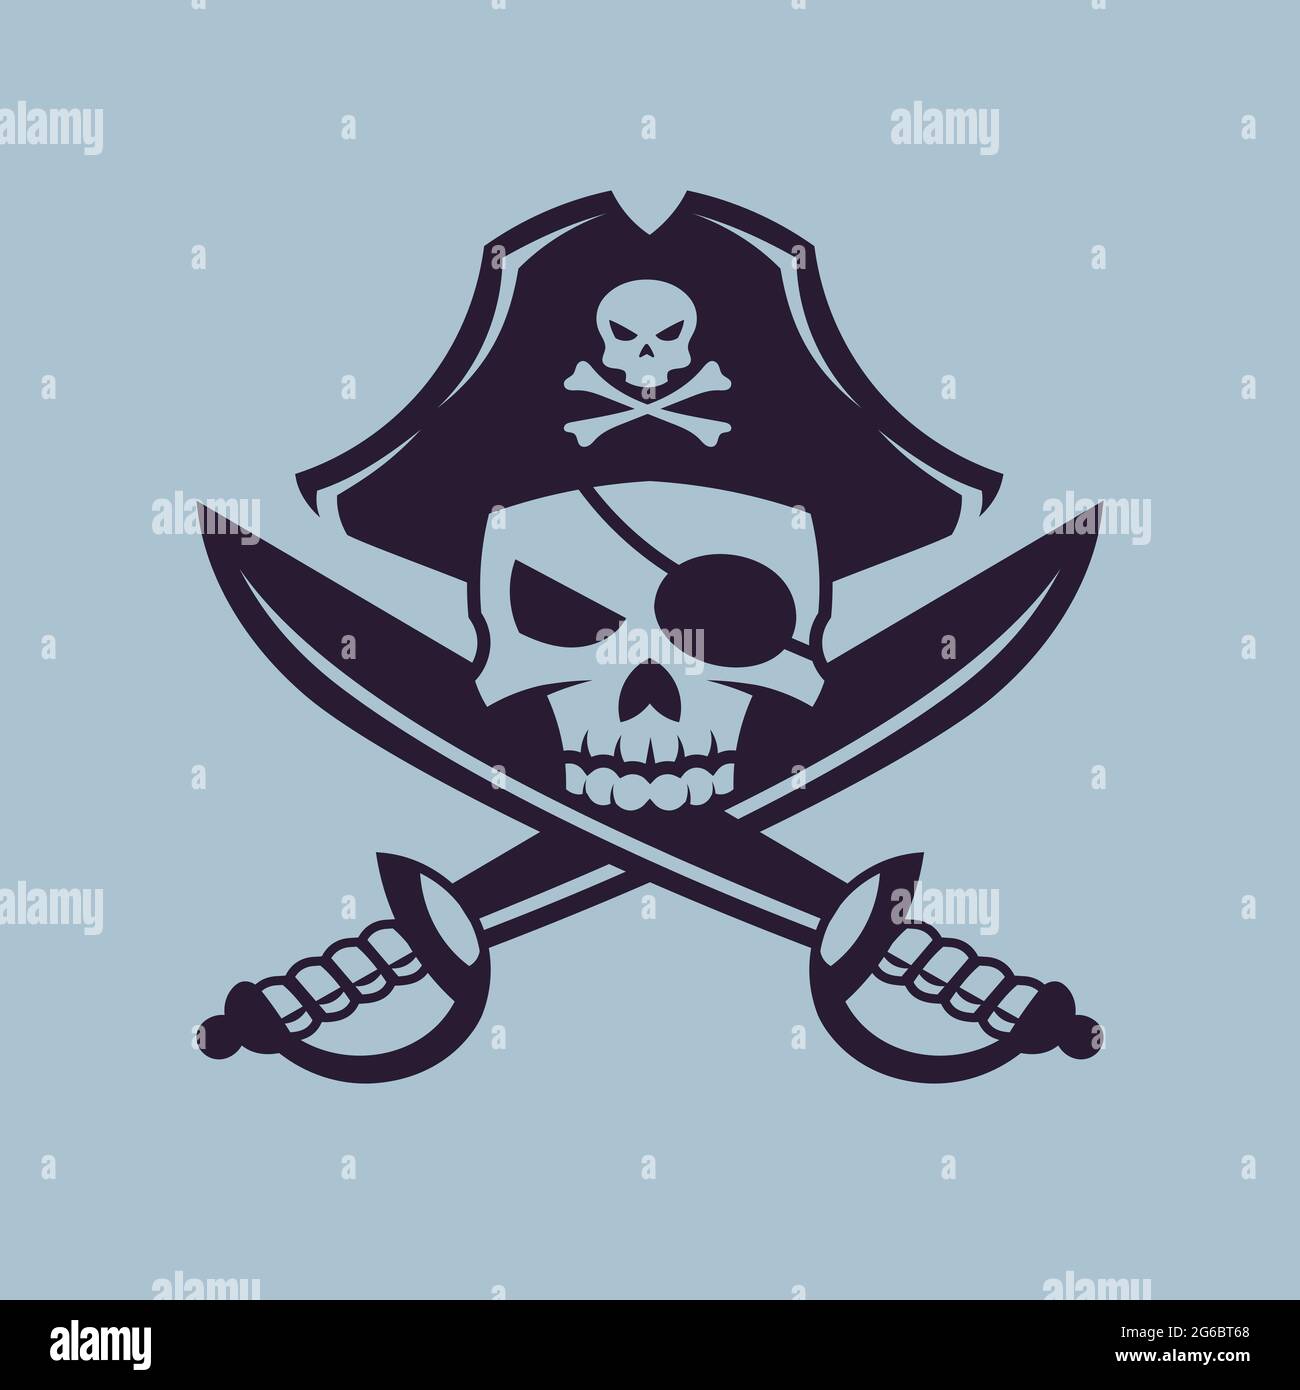 Skull with crossed sabers. Pirate concept art in monochrome style. Stock Vector